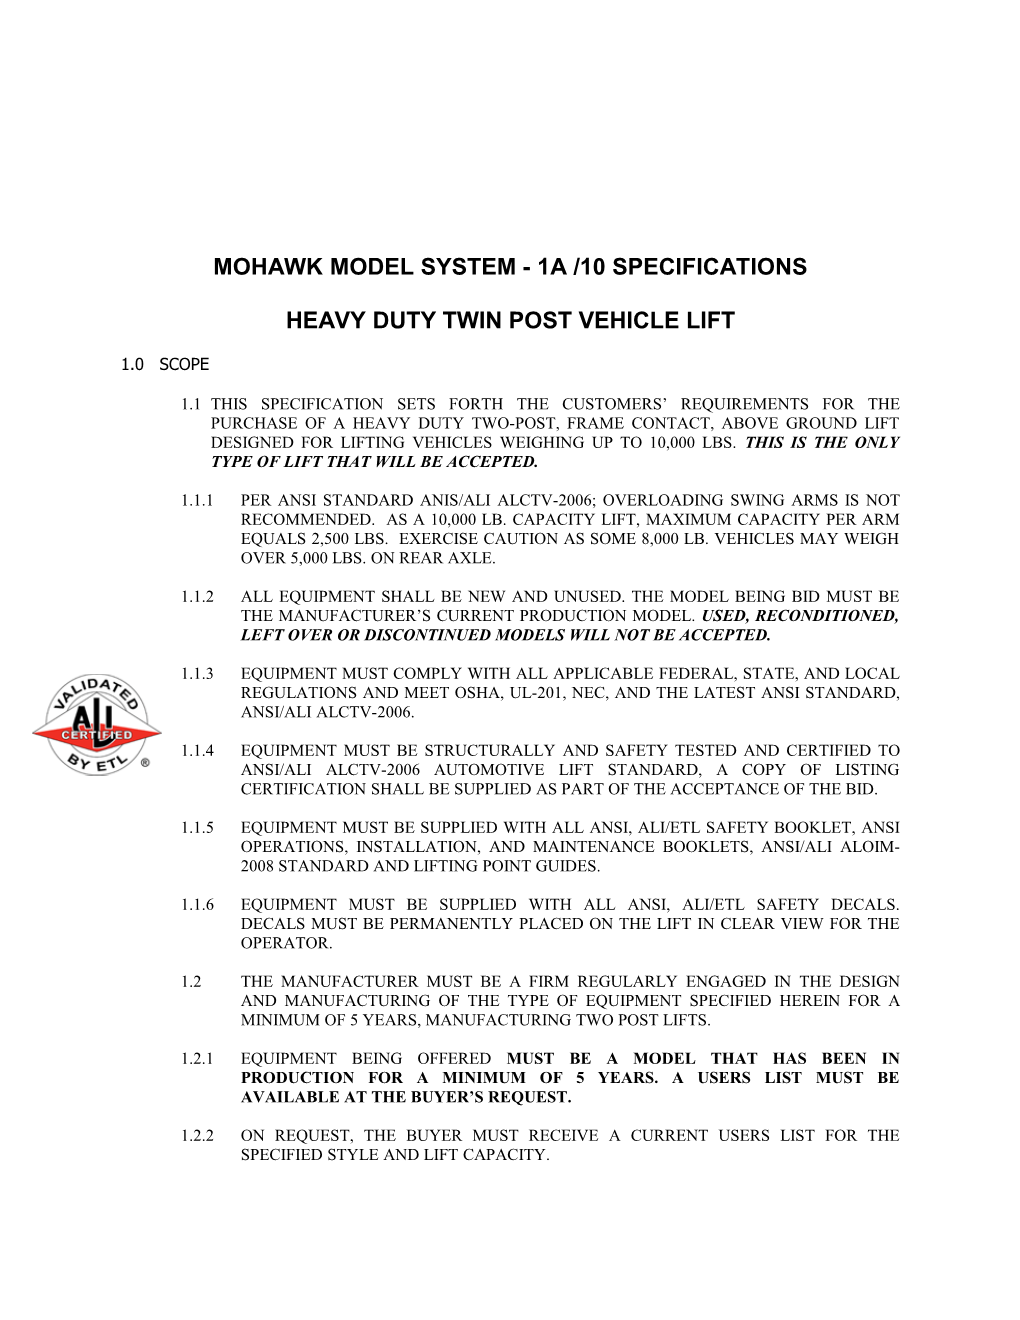 __ Mohawk Model System -1A Specifications